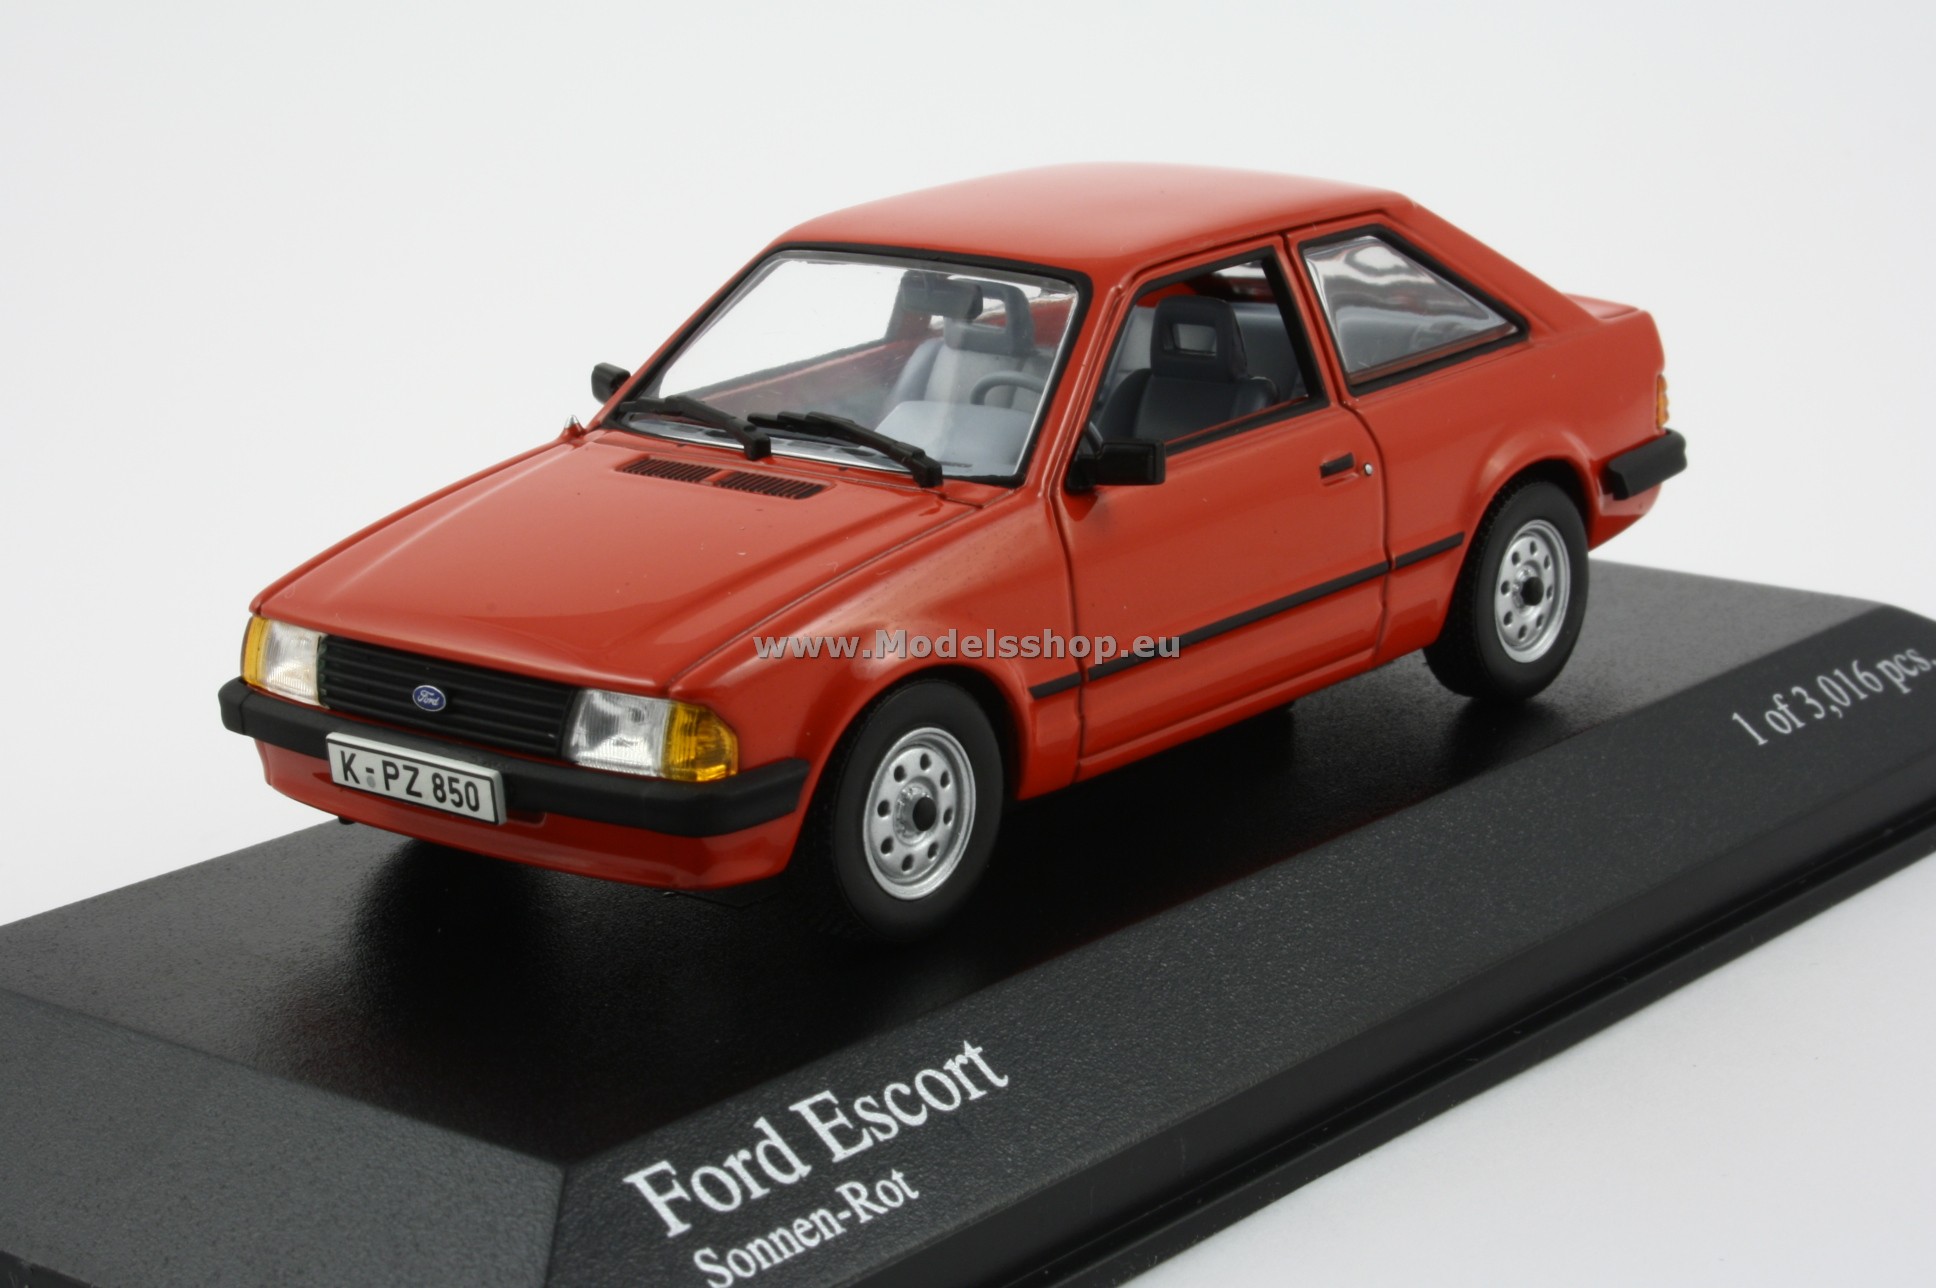 FORD ESCORT - 1981 - RED